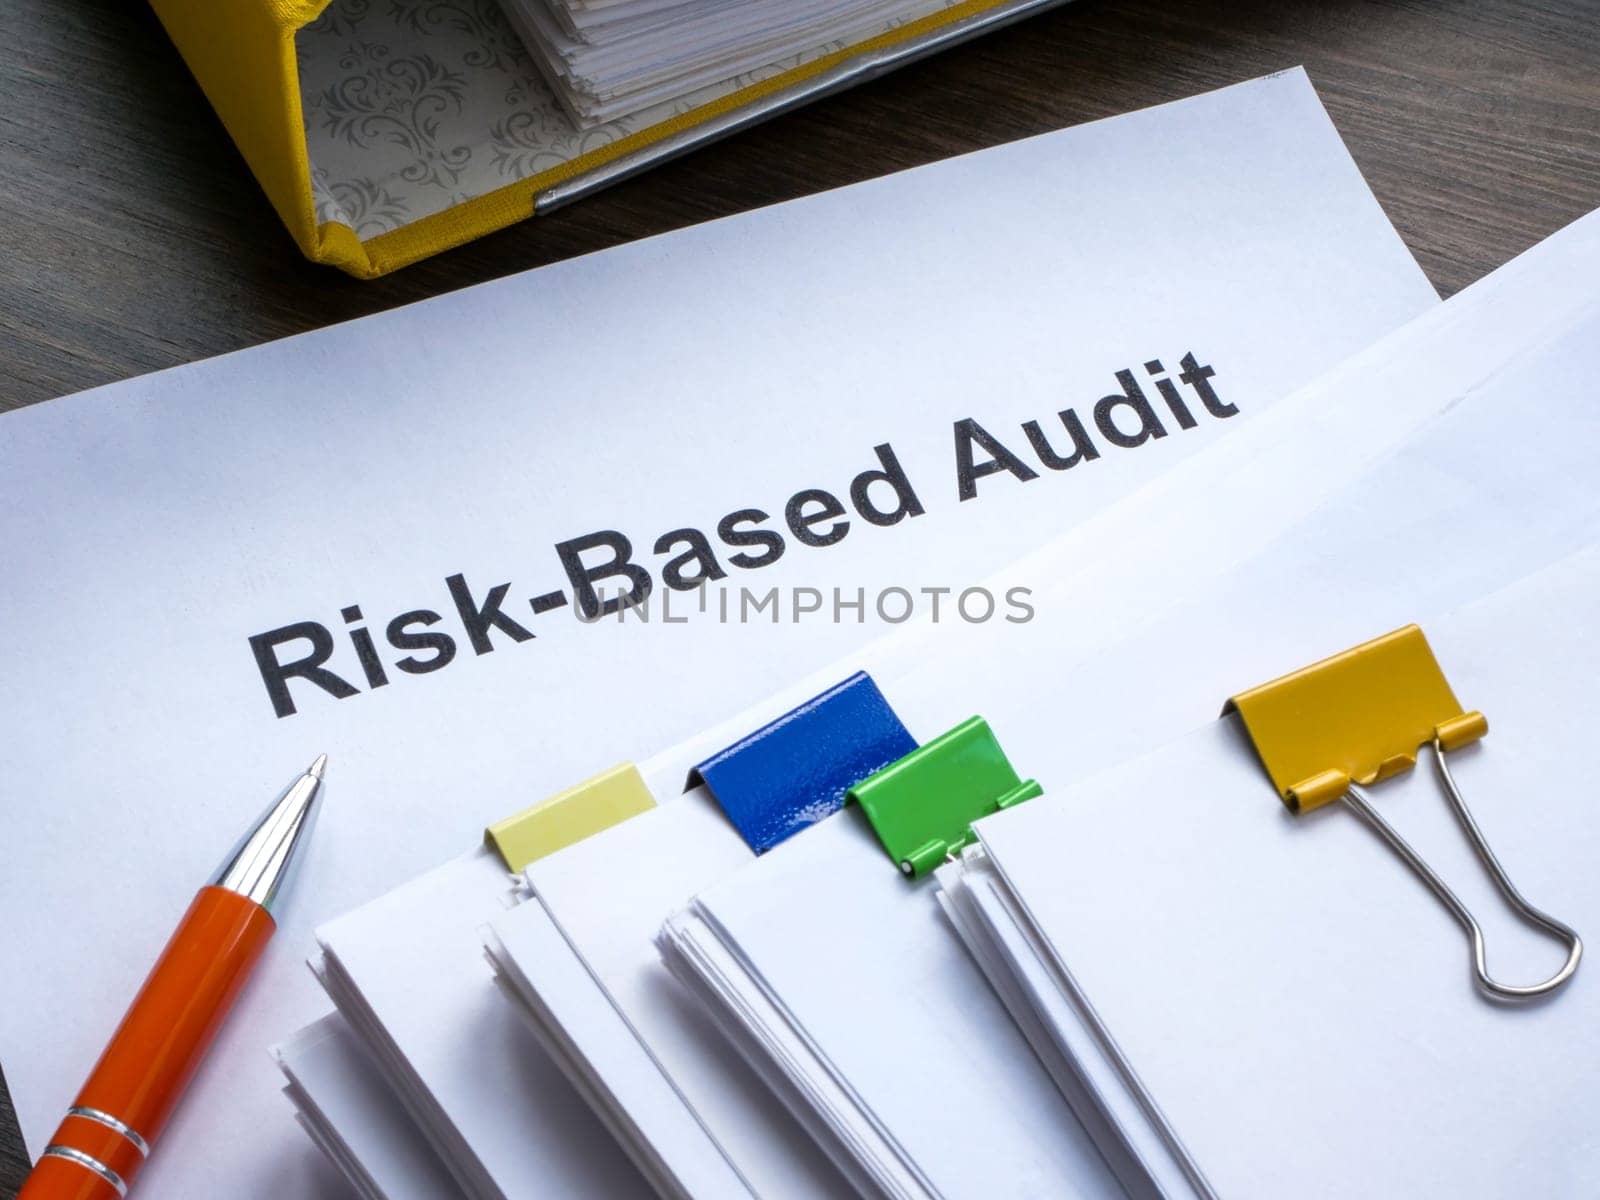 Risk based audit report and pen.